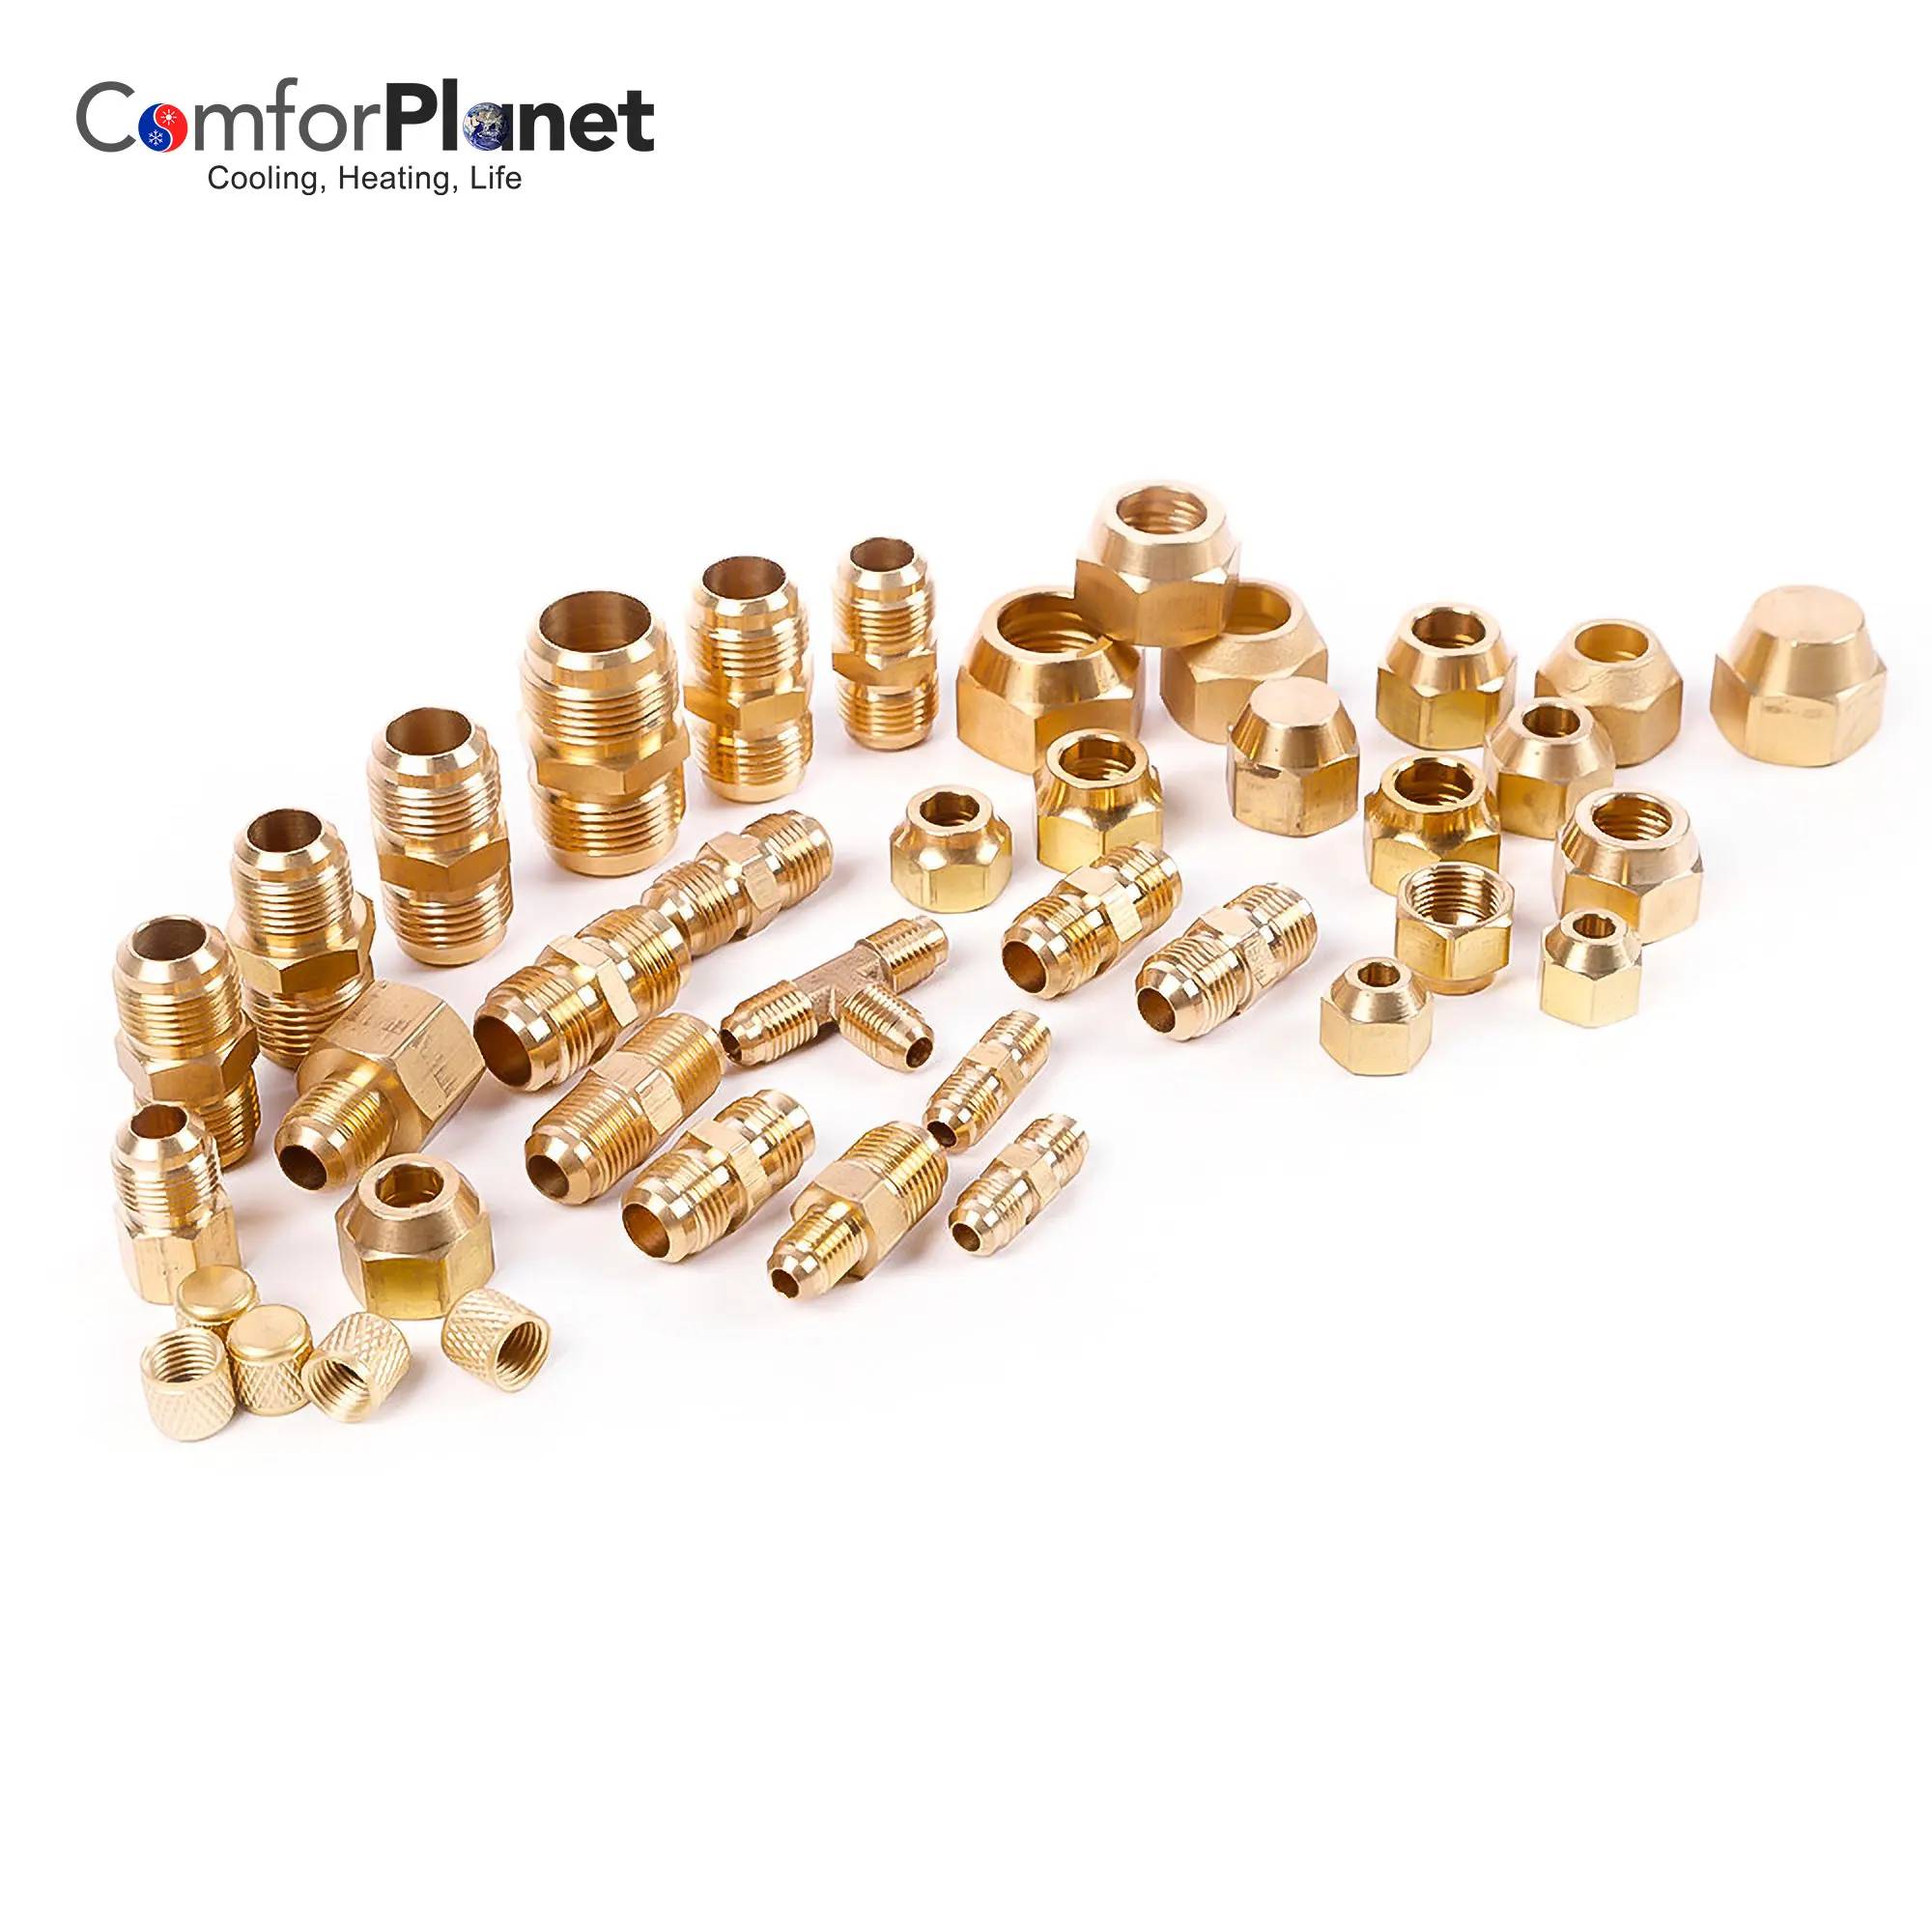 Hot Selling Refrigeration Copper Connector Ferrule Hose plumbing Compression Pipe Union Reducing brass fittings